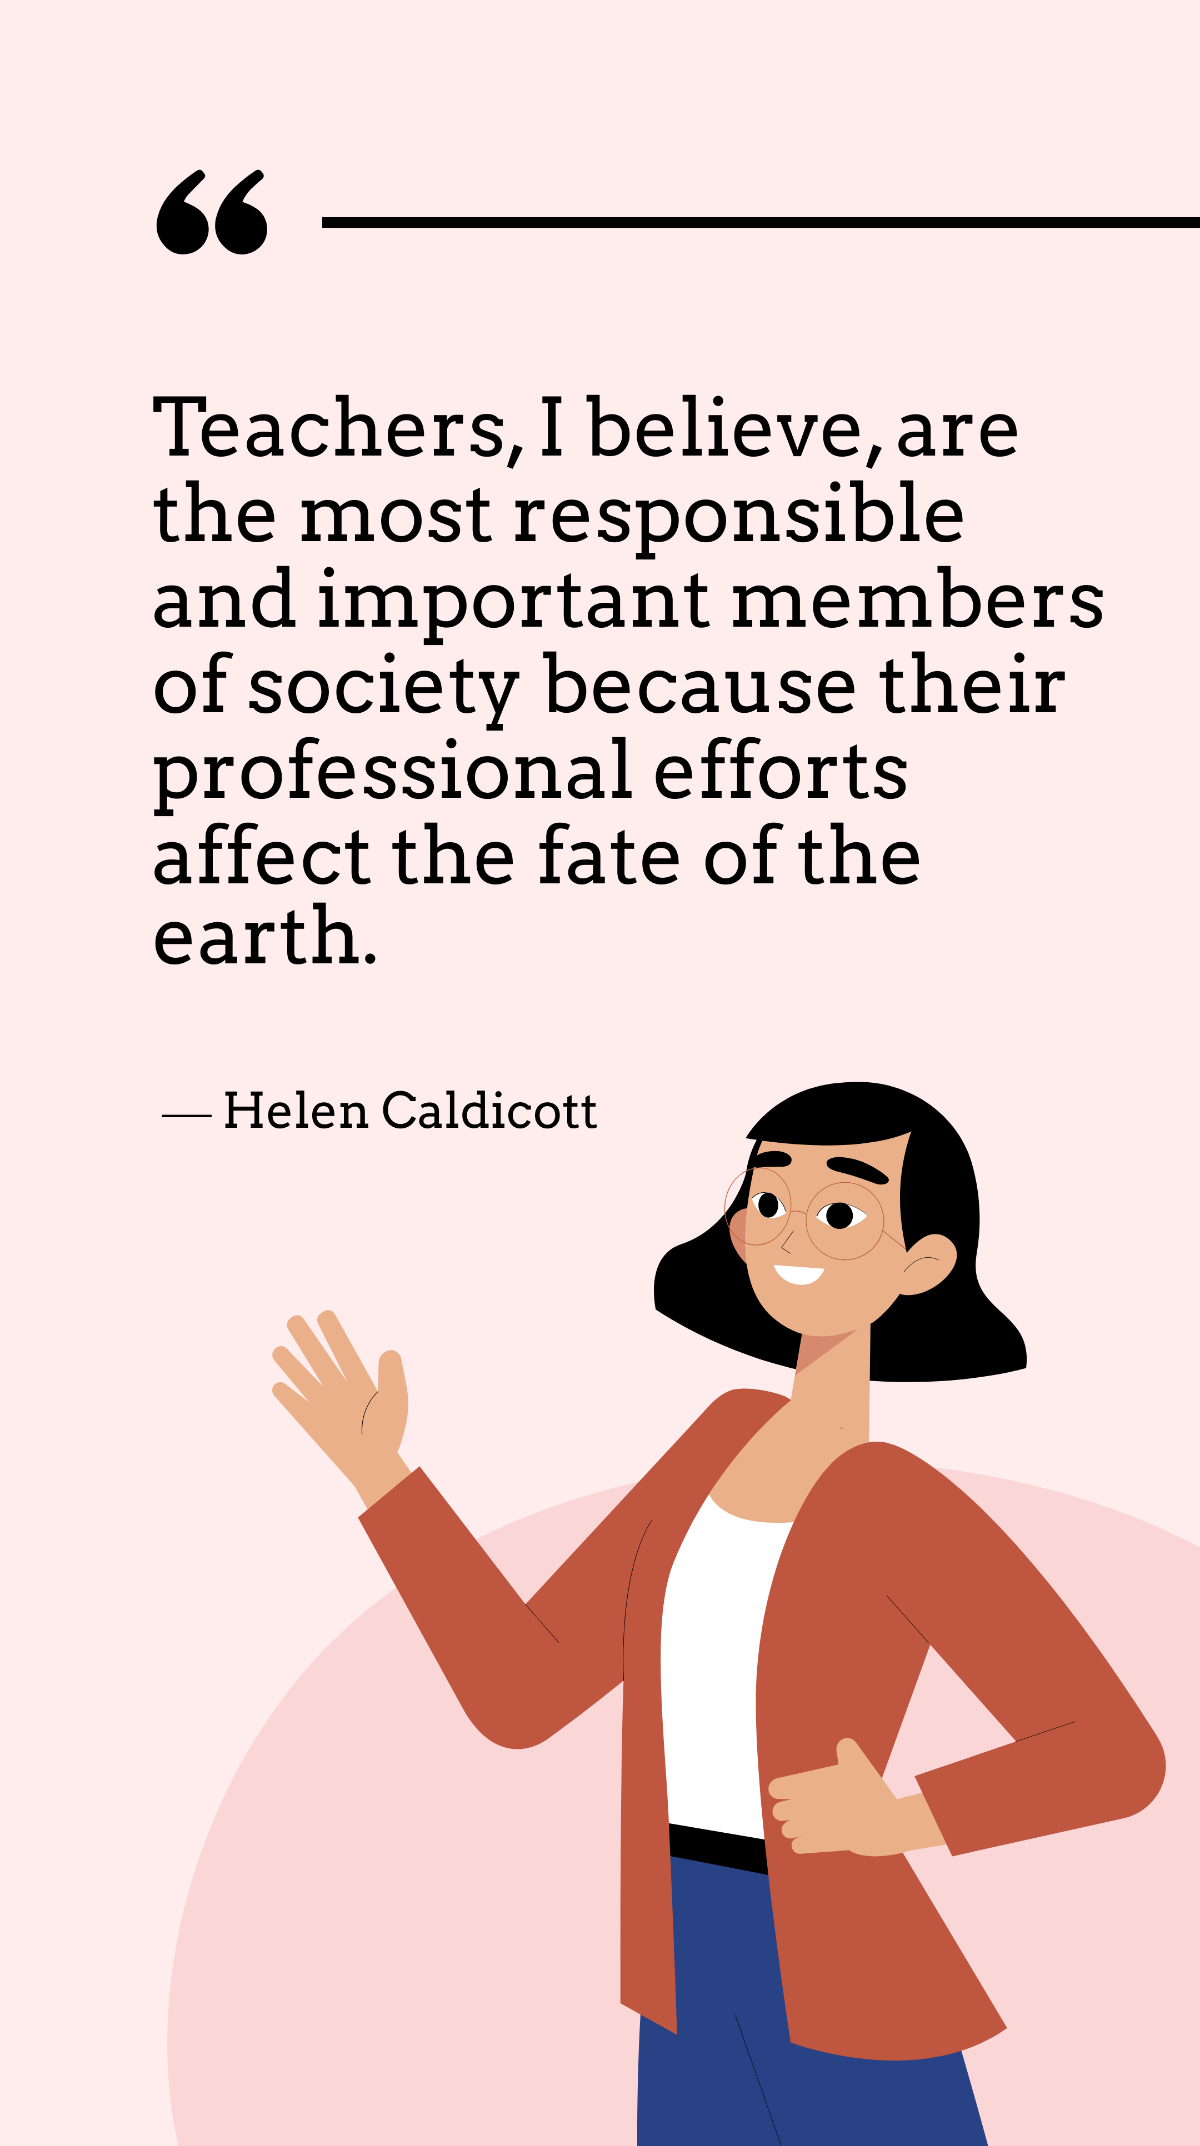 Free Helen Caldicott - Teachers, I believe, are the most responsible and important members of society because their professional efforts affect the fate of the earth. Template